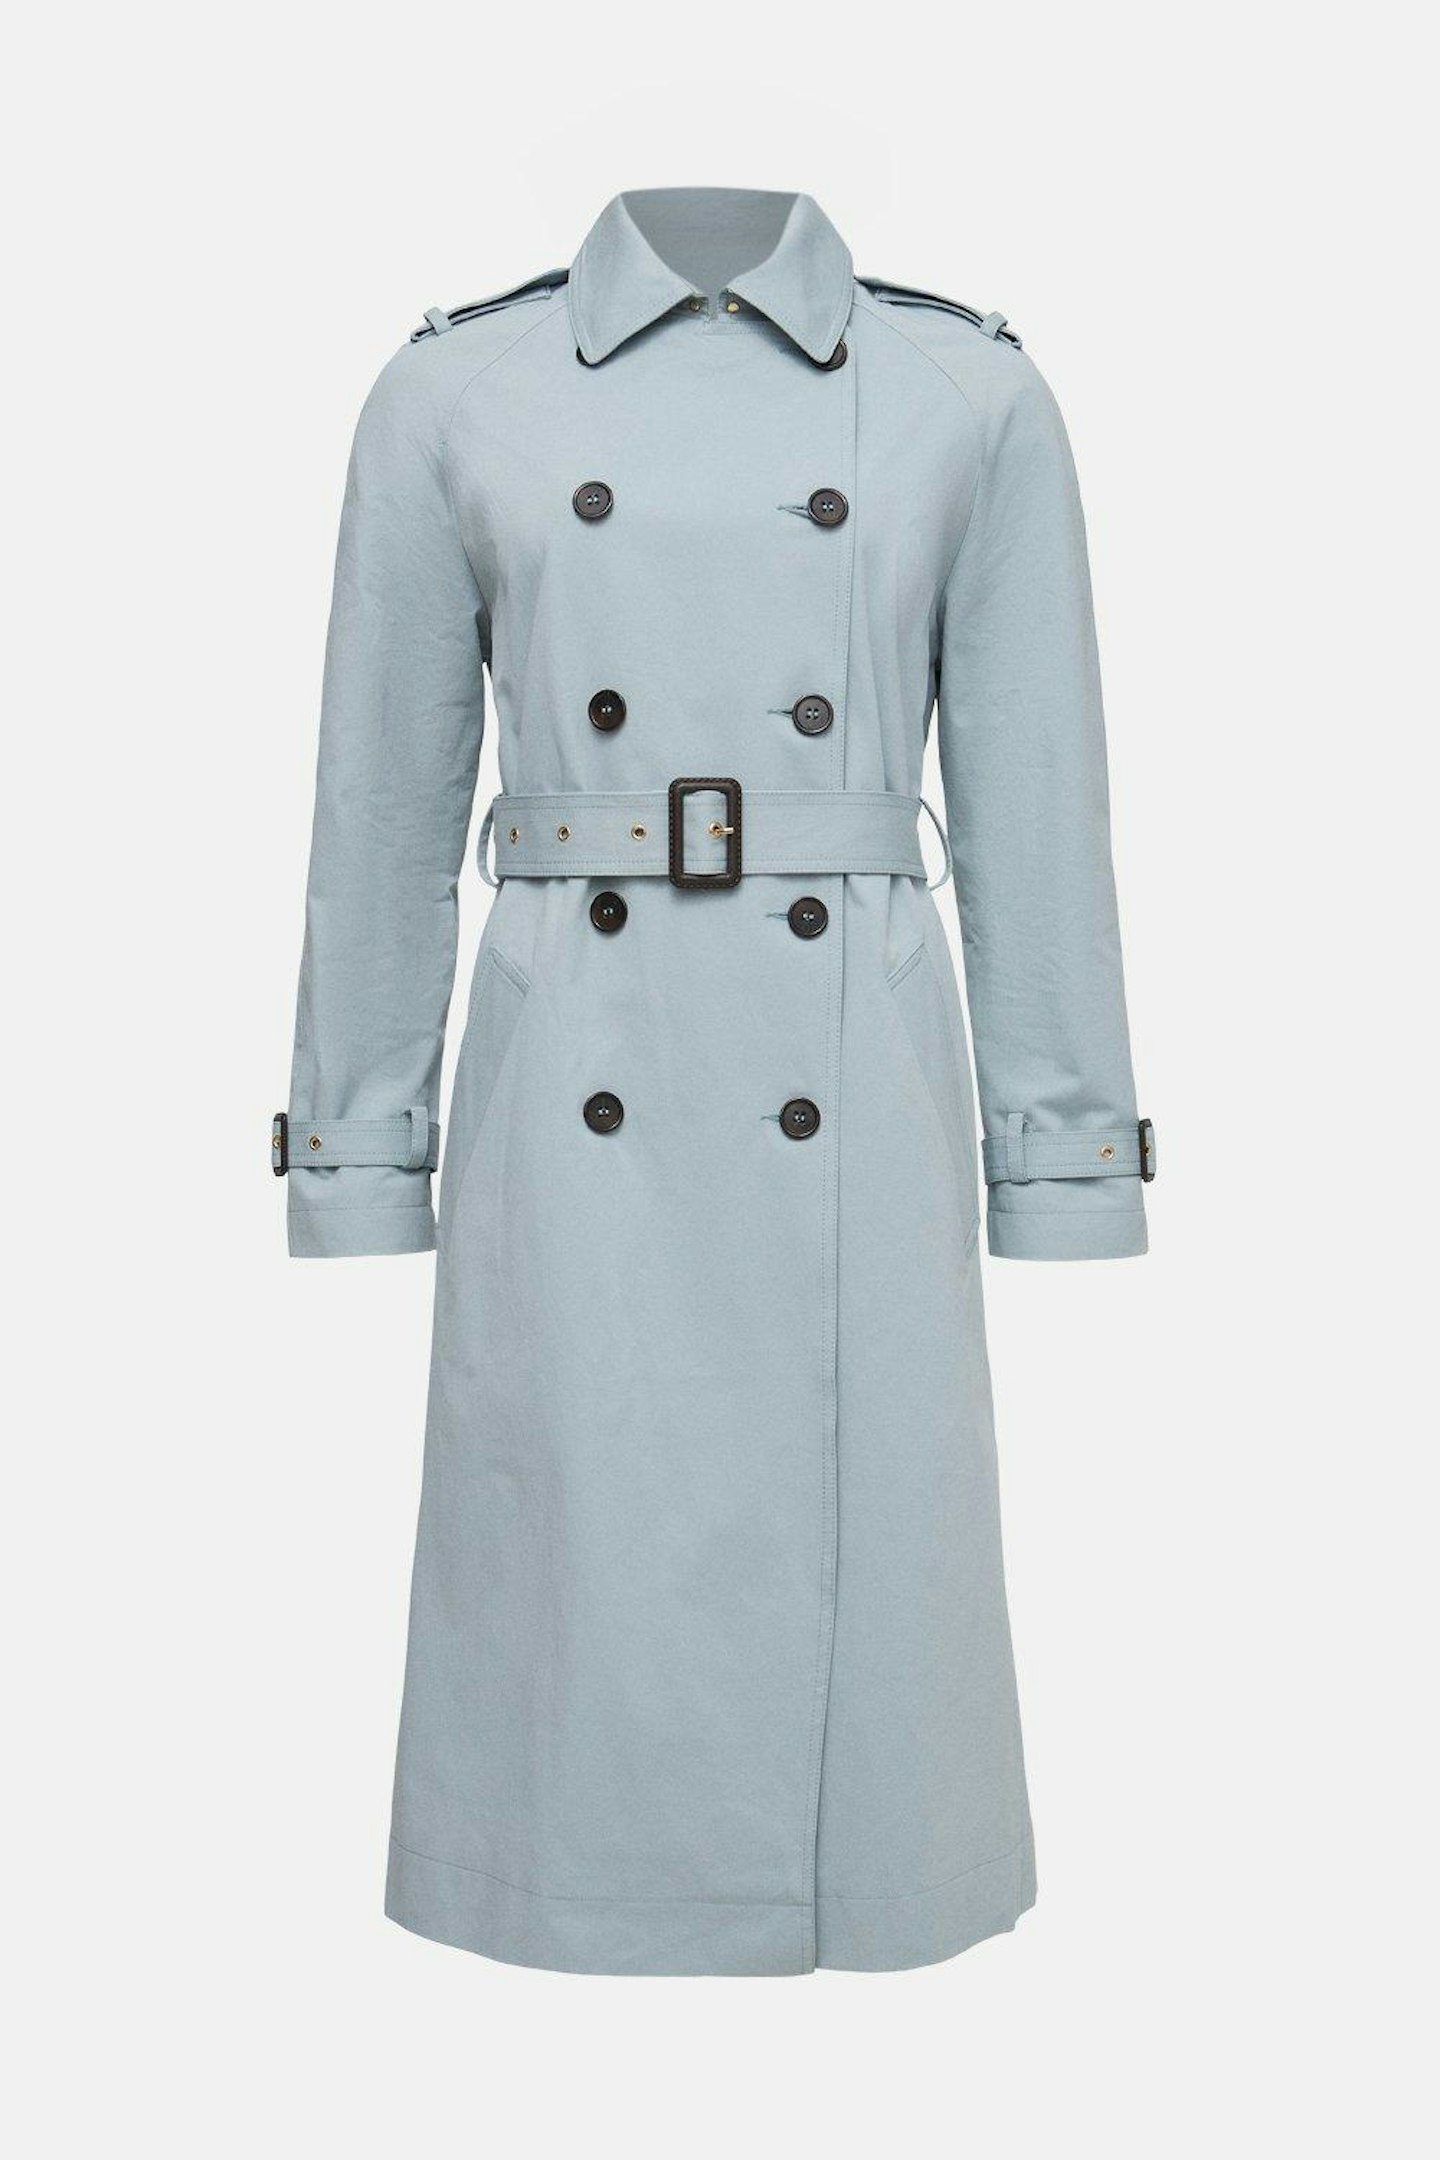 best trench coats for women Warehouse, Raglan Sleeve Pale Blue Trench Coat, £111.20